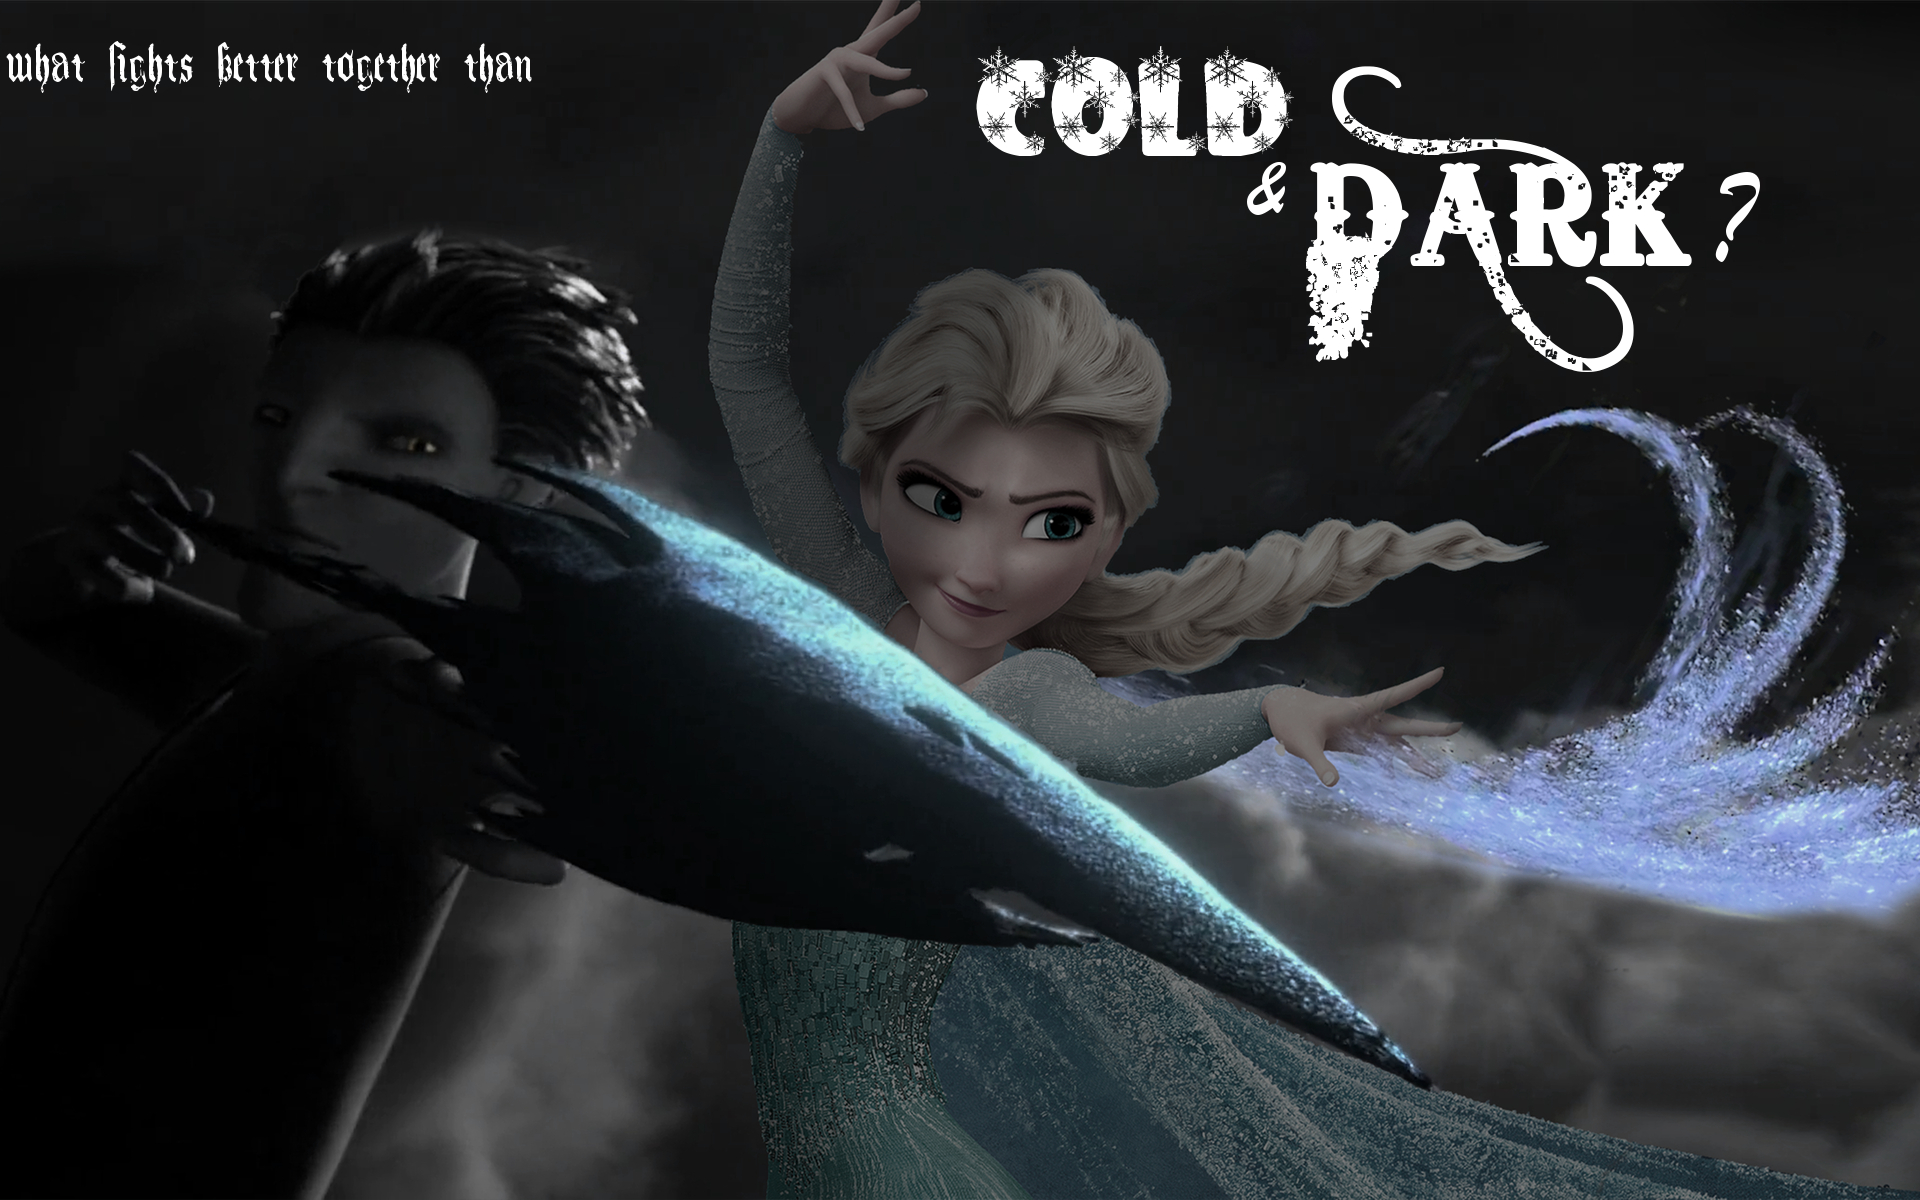 What fights better together than cold and dark? - Elsa and Pitch Wallpaper  (36460611) - Fanpop